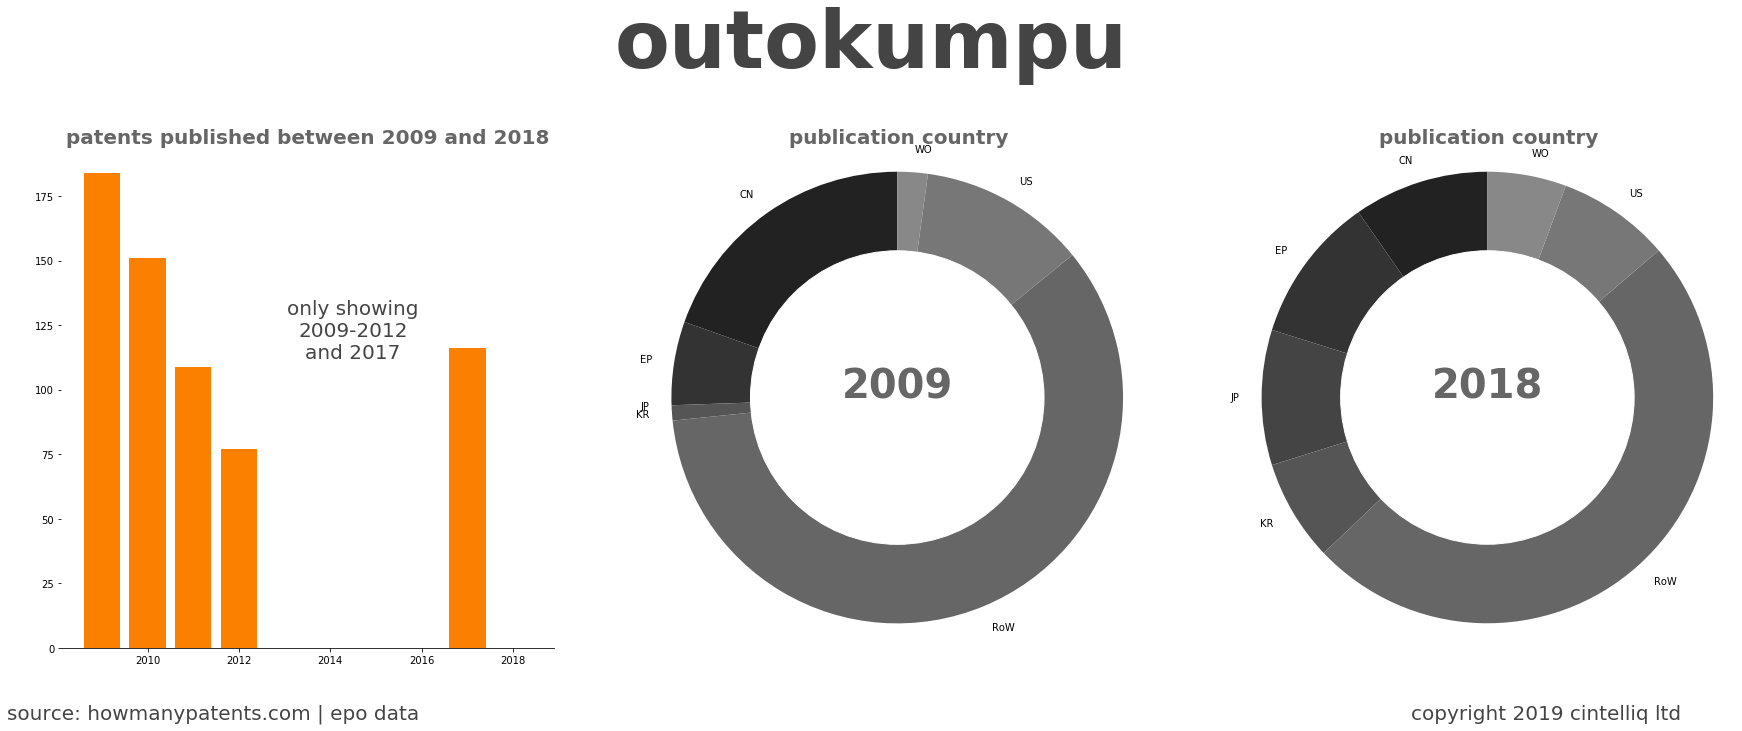 summary of patents for Outokumpu